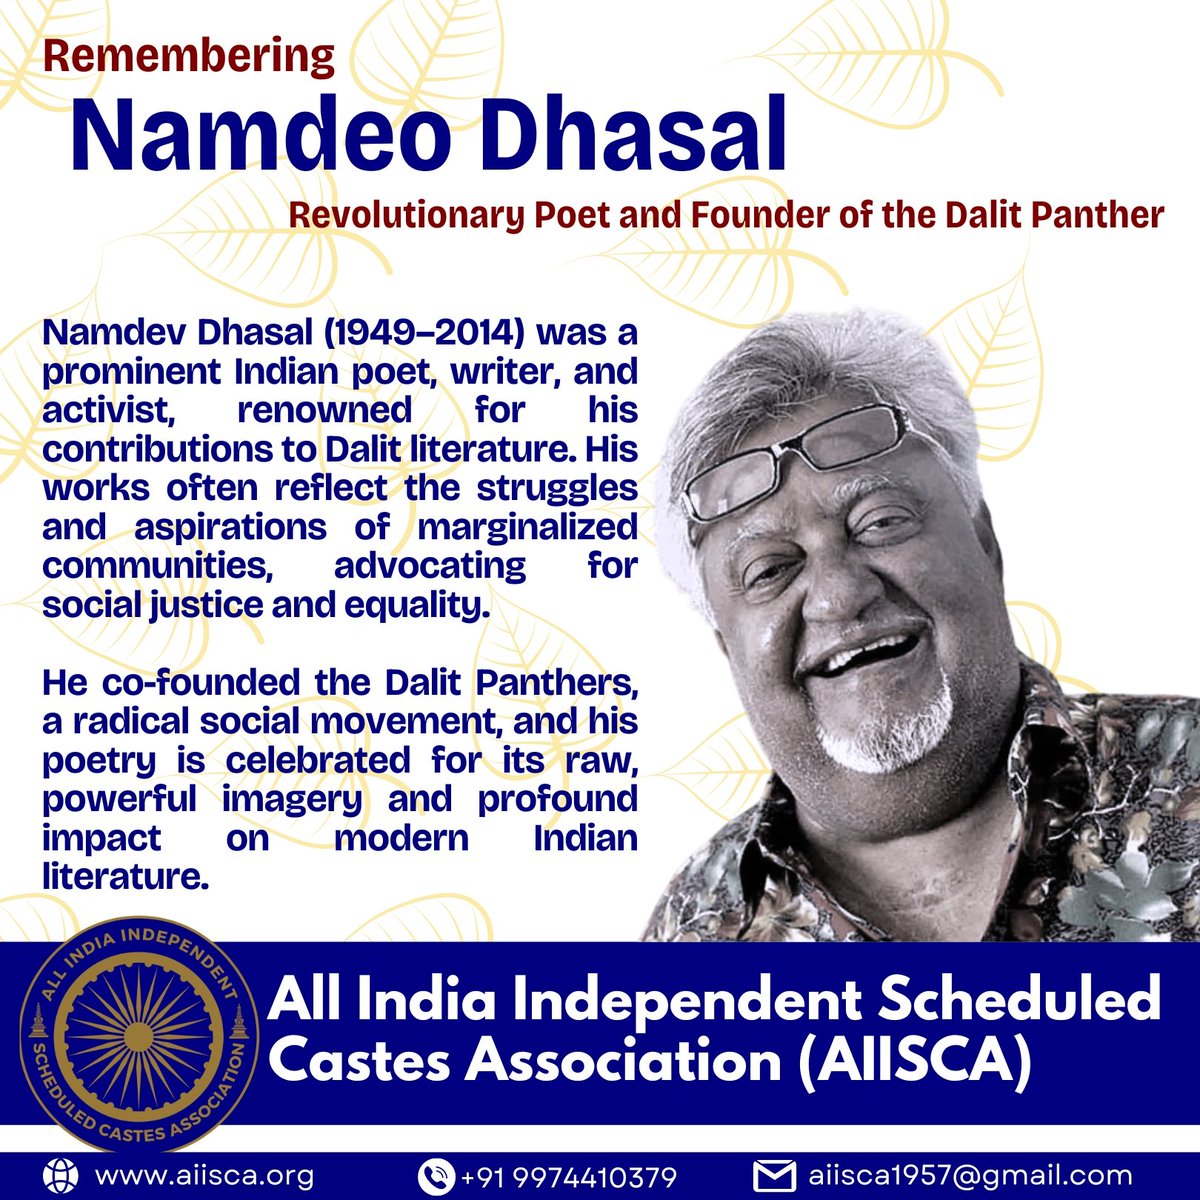 AIISCA honors Namdev Dhasal (1949–2014), a towering figure in Indian literature and a champion of social justice and equality. His profound contributions to Dalit literature continue to inspire. #NamdevDhasal #DalitLiterature #DalitPanther
#SocialJustice